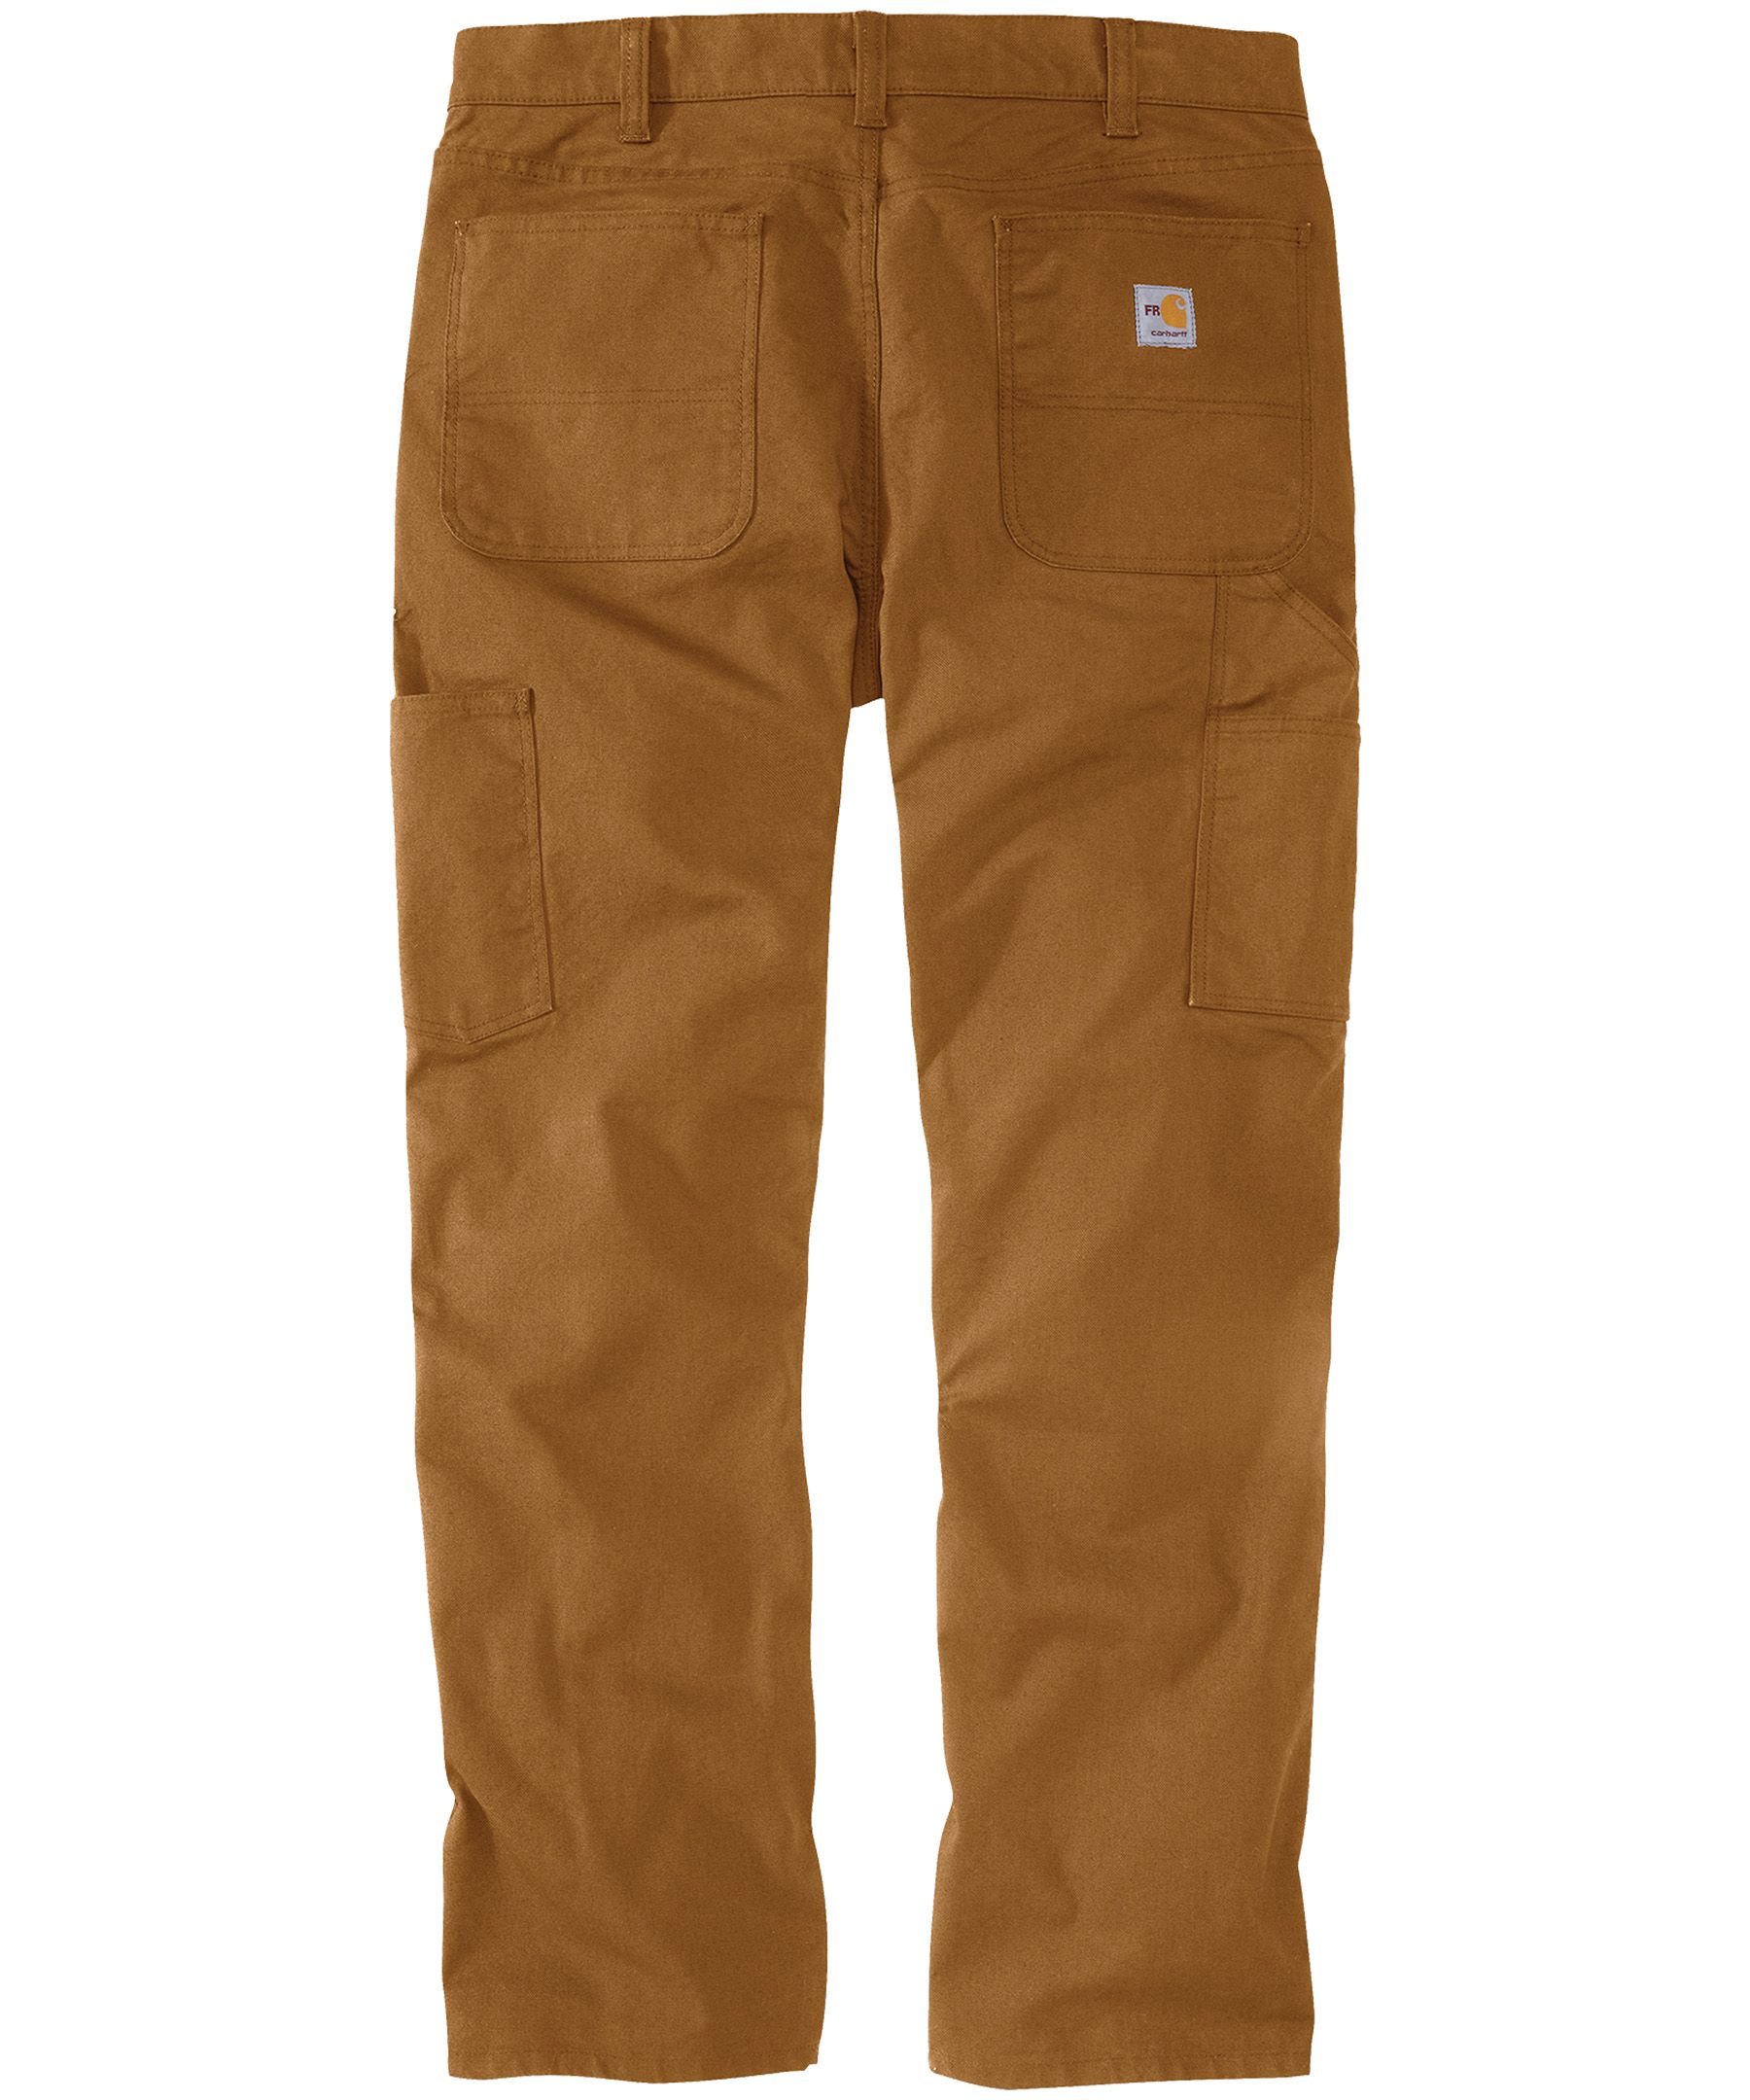 Men's Relaxed Fit Pants